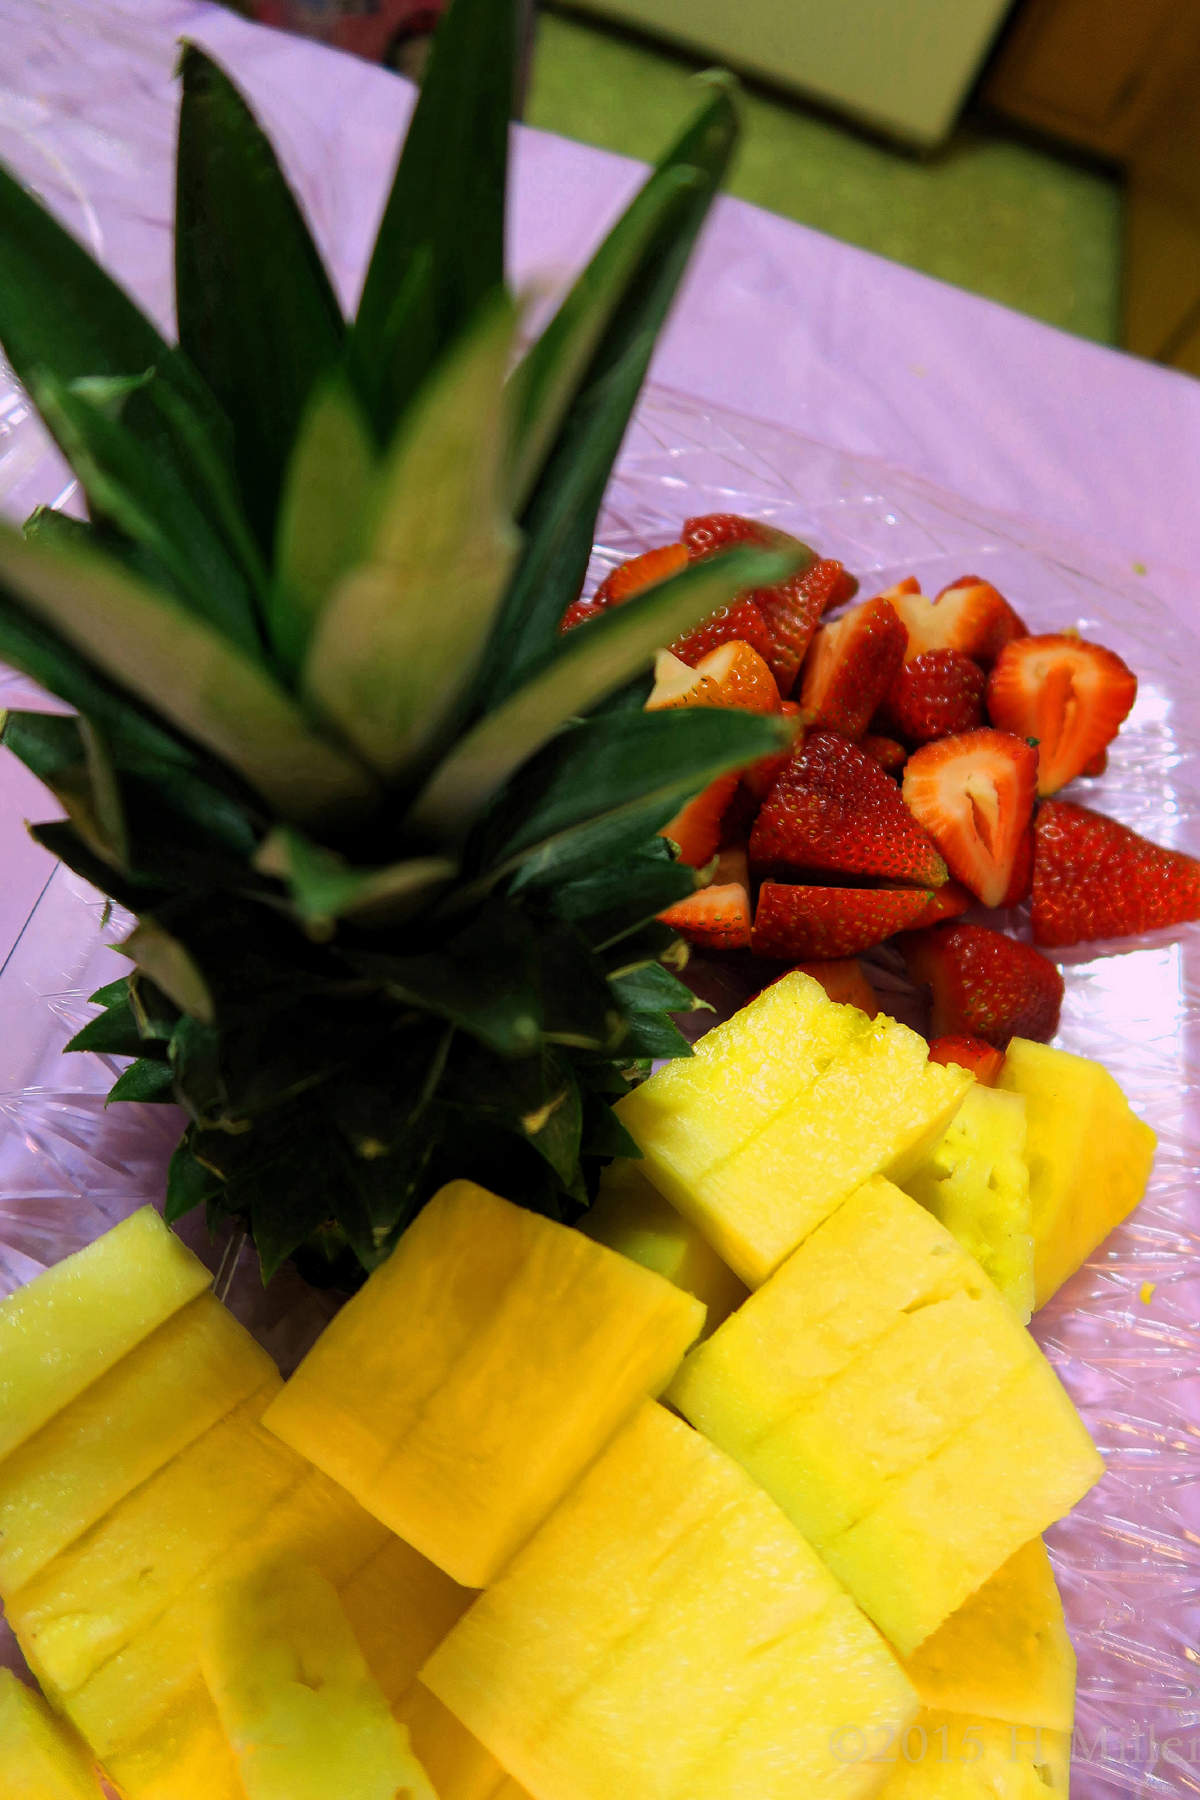 Alanna's Dad Made An Awesome Decoration From The Pineapple For The Kids Spa Party Treats!